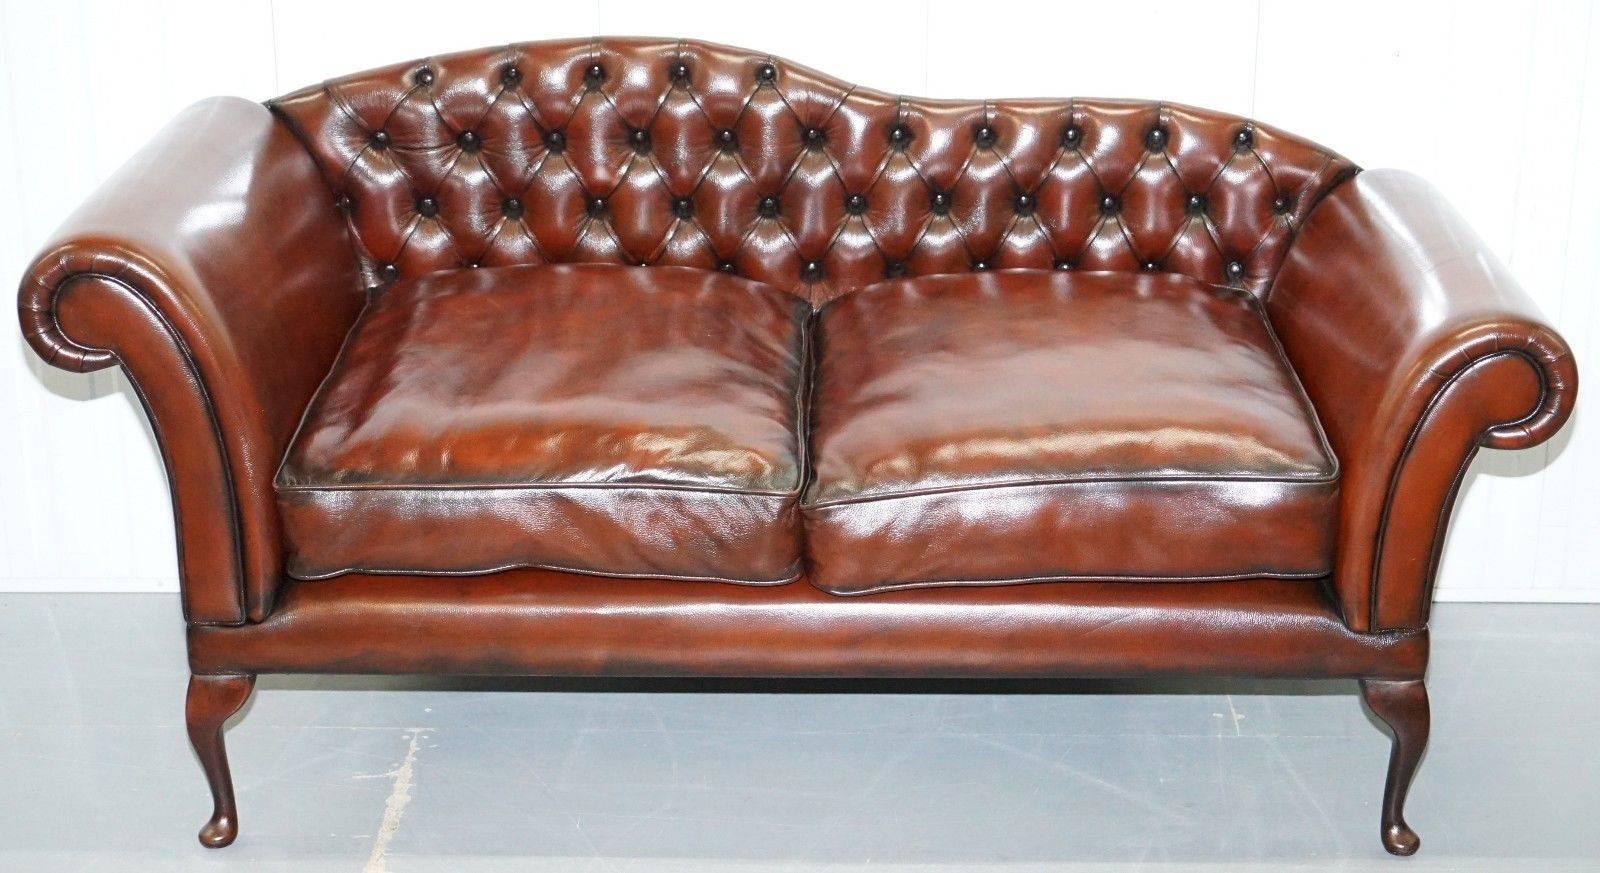 Fully Restored Chesterfield Buttoned Cigar Brown Leather Chaise Longue Sofa 1